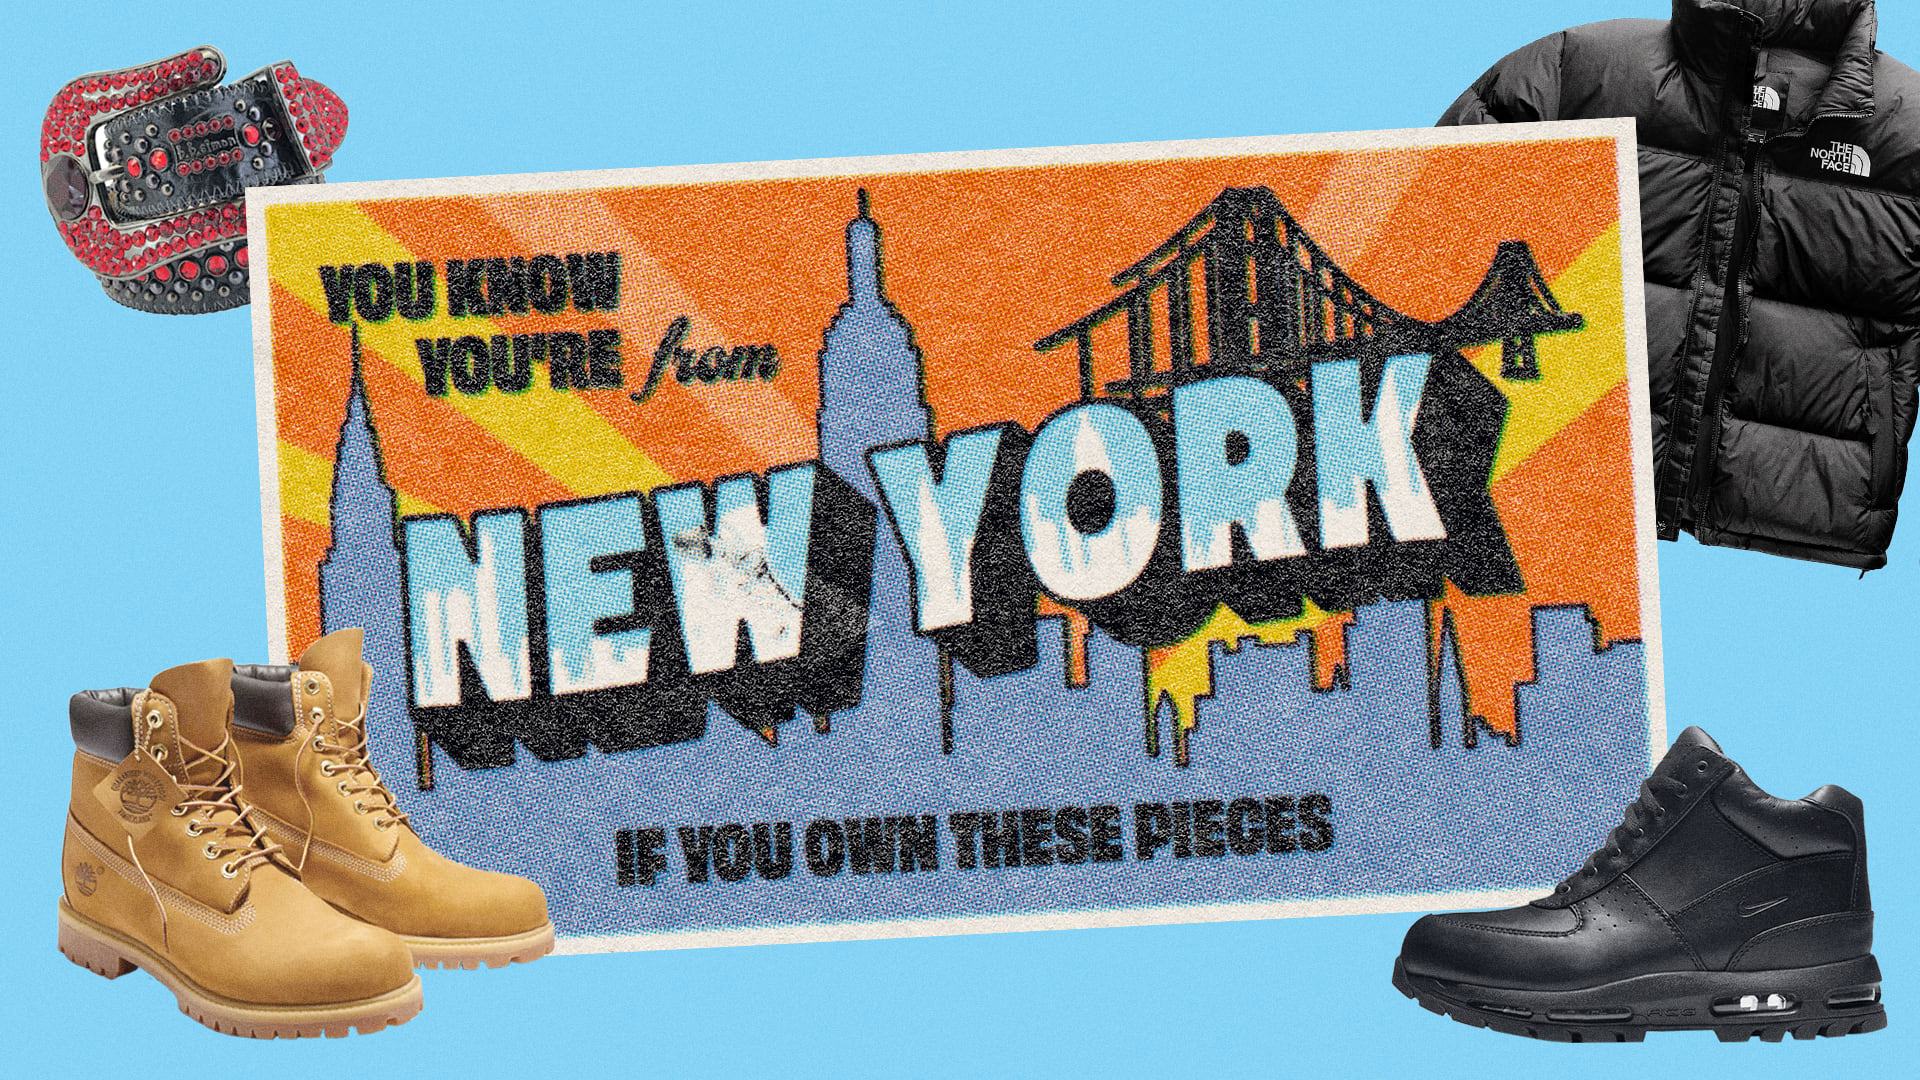 Cumbre Lesionarse Expectativa Timbs to North Face Coat: You're From NYC If You Have These | Complex